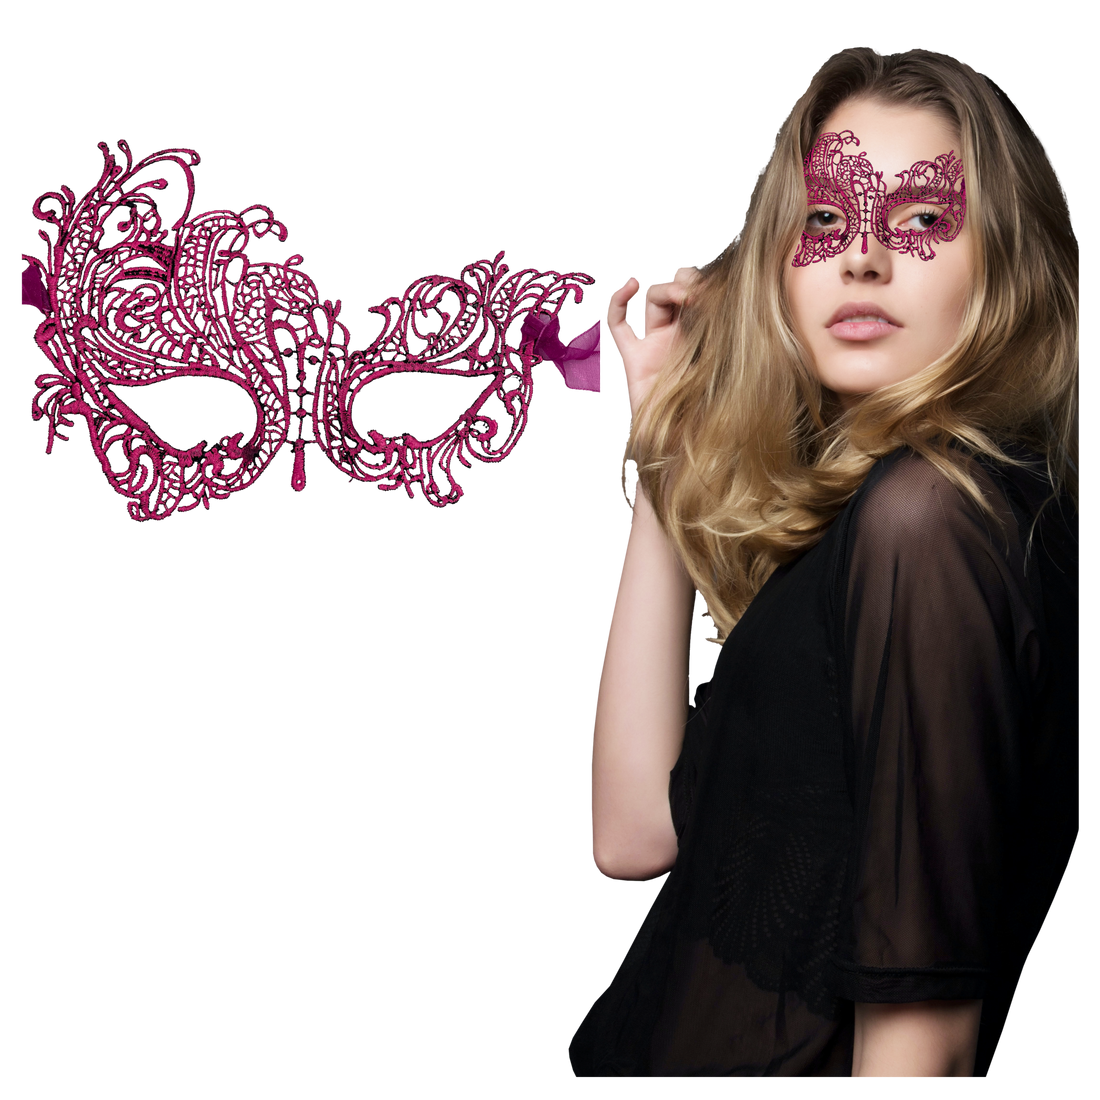 Experience Glamour and Mystery with the Swan Magenta Pink Lace Masquerade Mask for Women